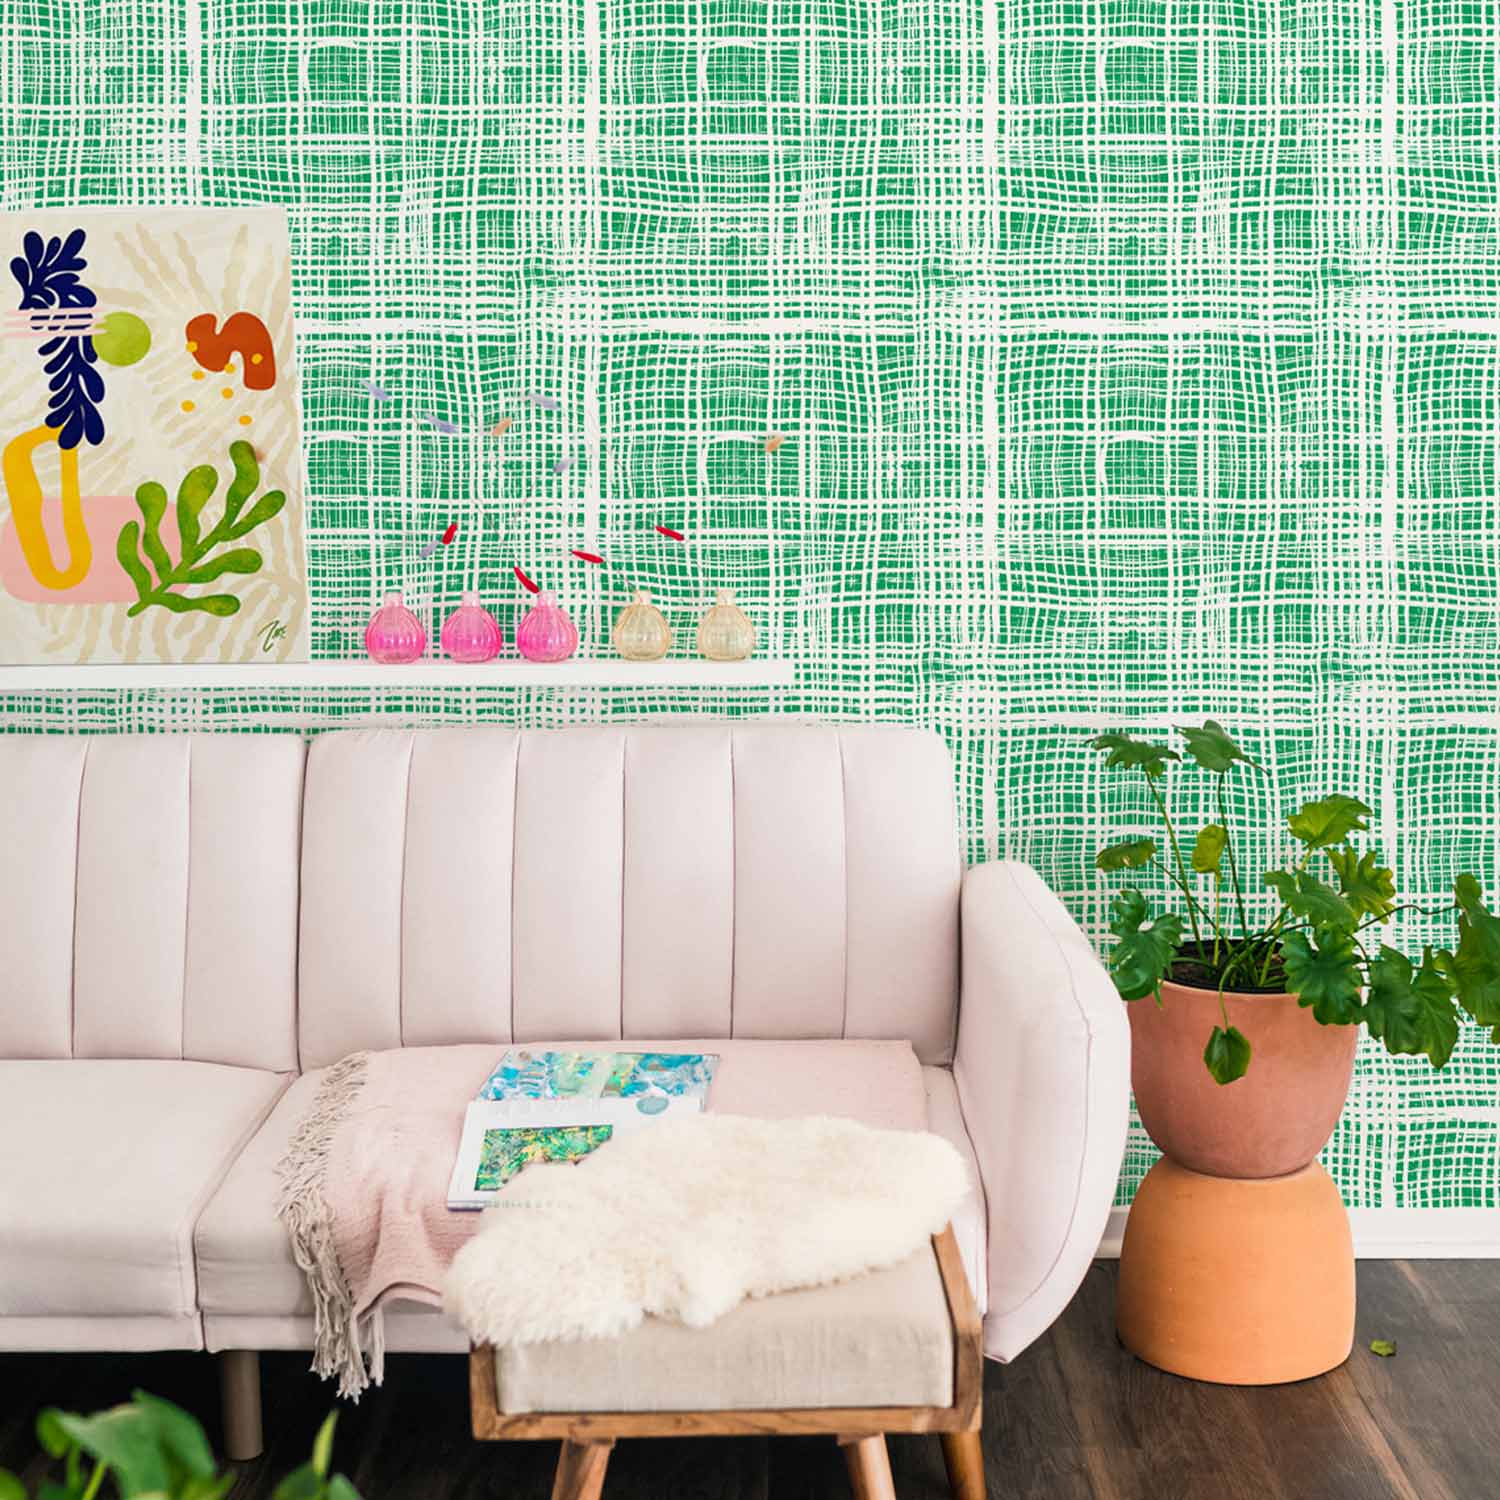 Kelly Green Plaid Fabric, Wallpaper and Home Decor